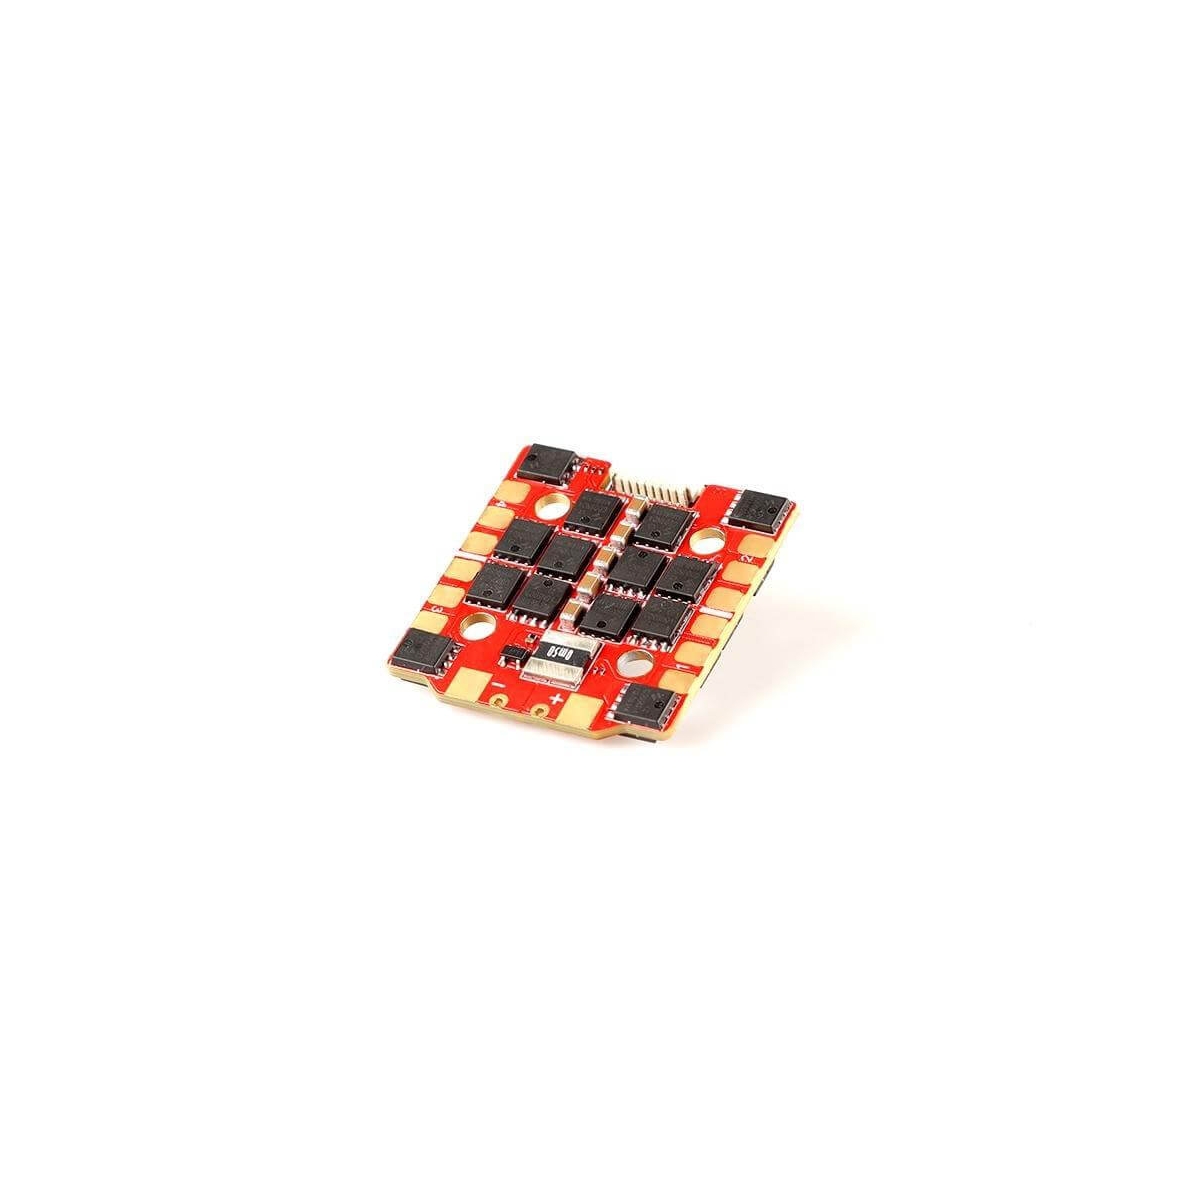 ESC for FPV racing drone